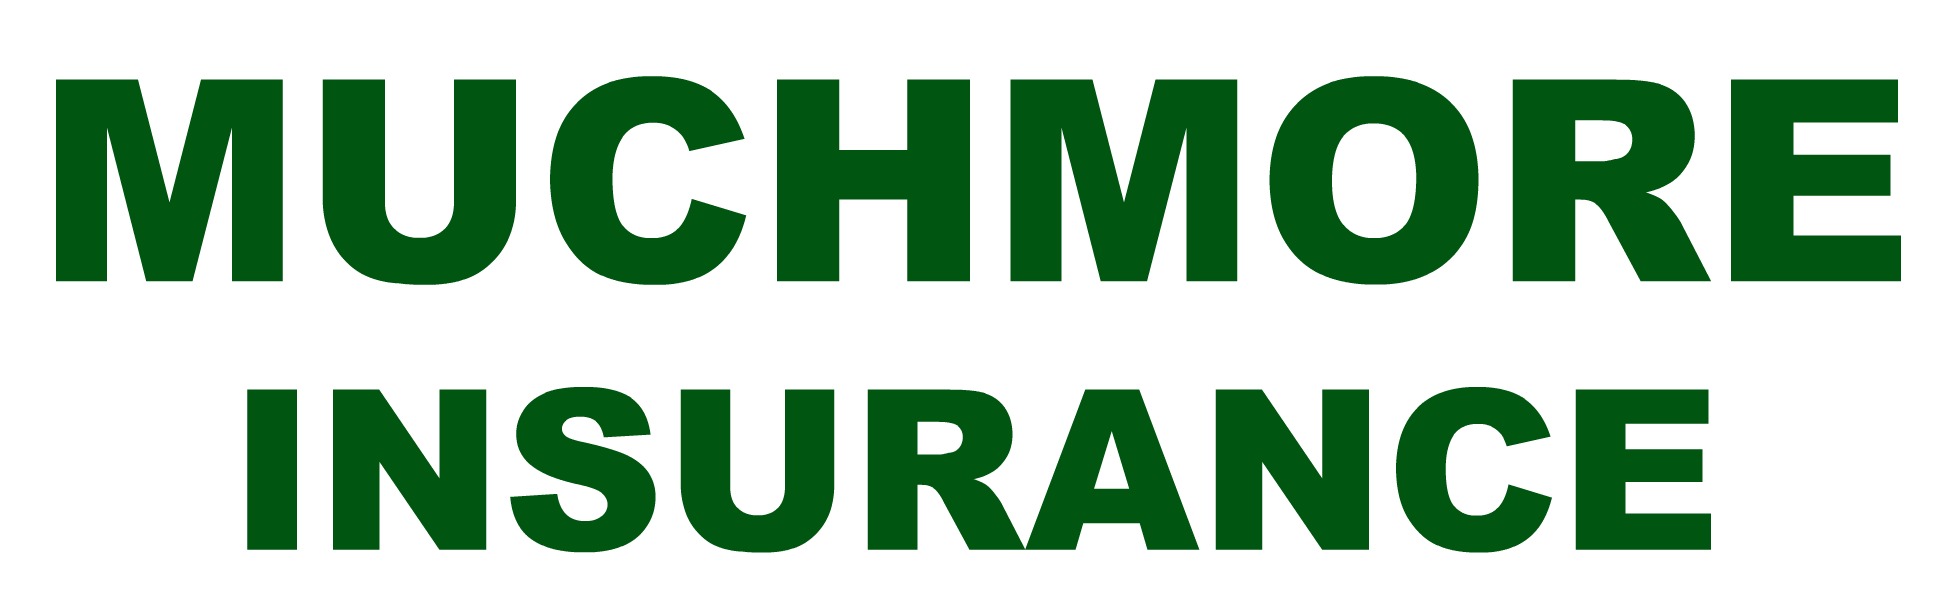 Muchmore Insurance and Financial Services, Inc.